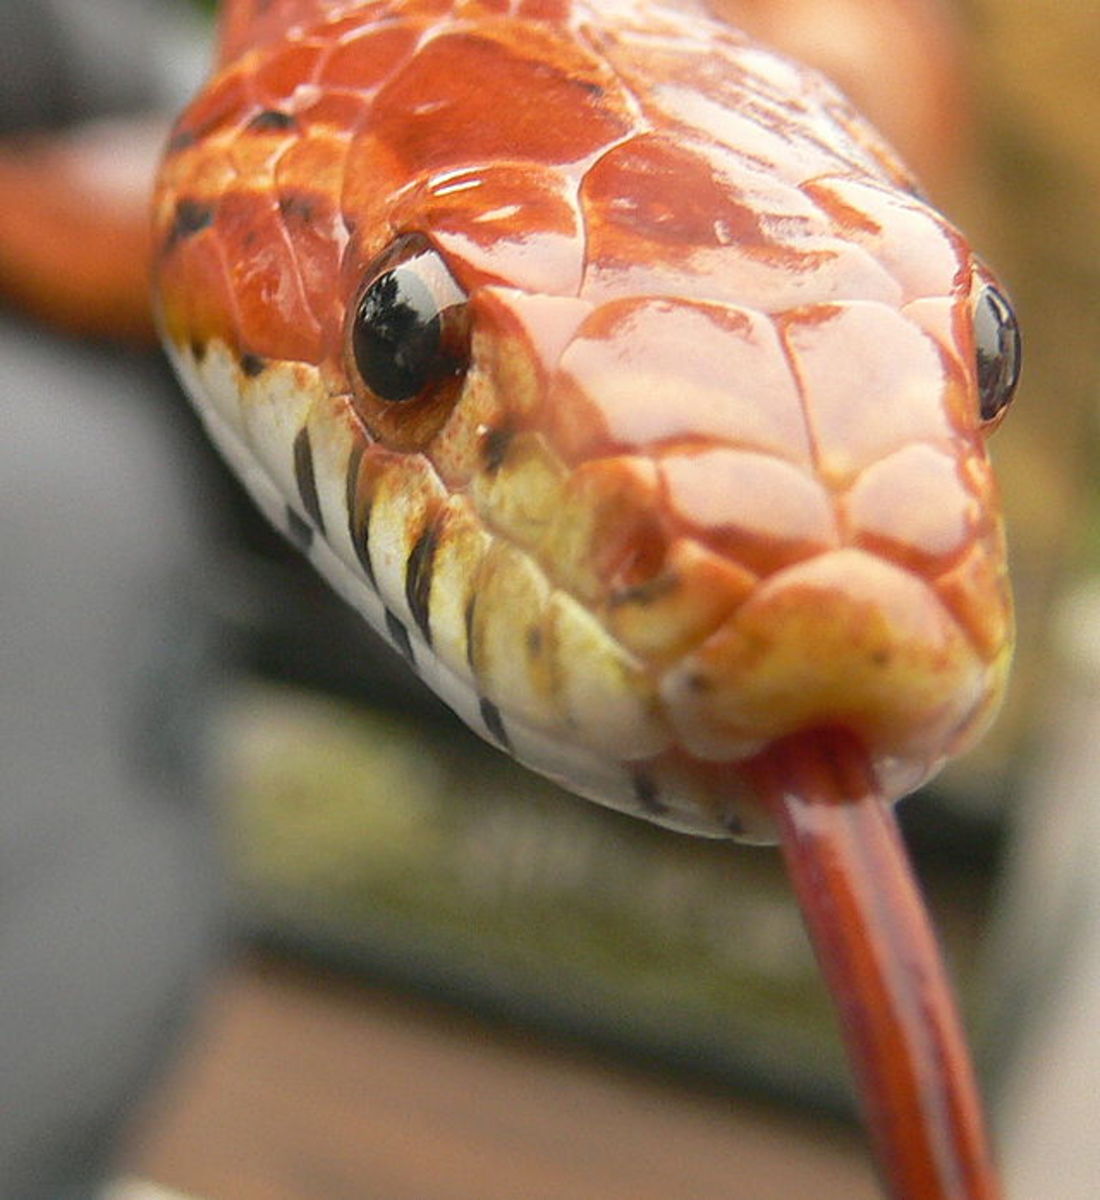 Corn snakes make unusual and interesting pets. They are also relatively easy to care for.